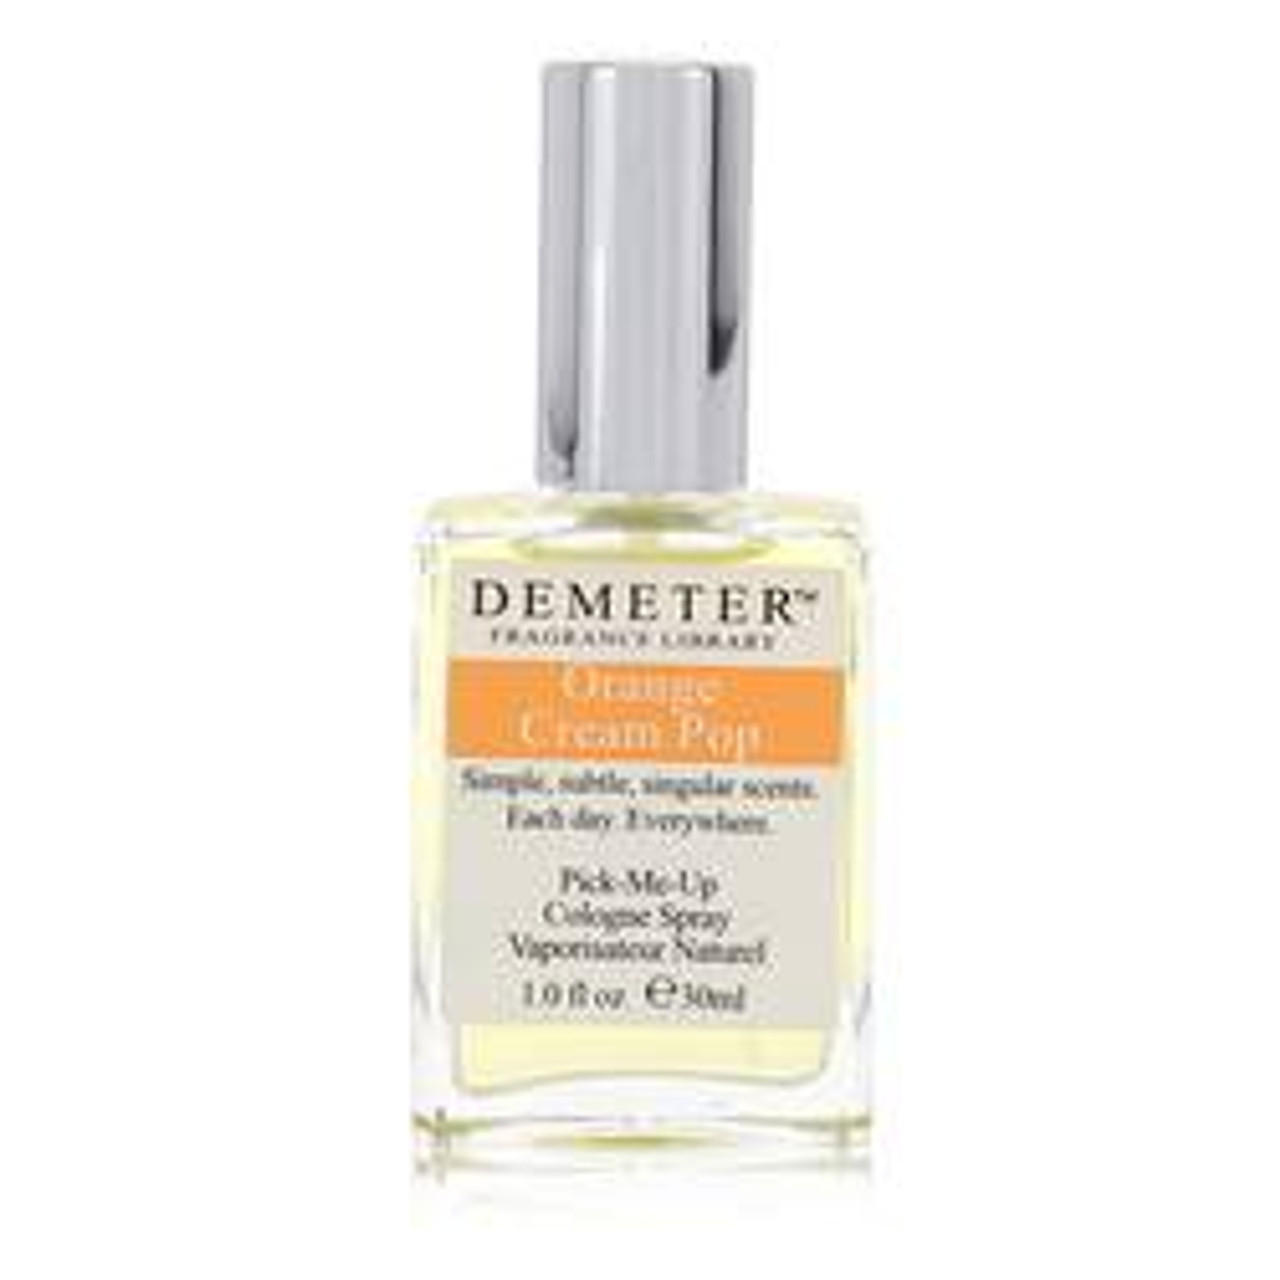 Demeter Orange Cream Pop Perfume By Demeter Cologne Spray 1 oz for Women - [From 31.00 - Choose pk Qty ] - *Ships from Miami